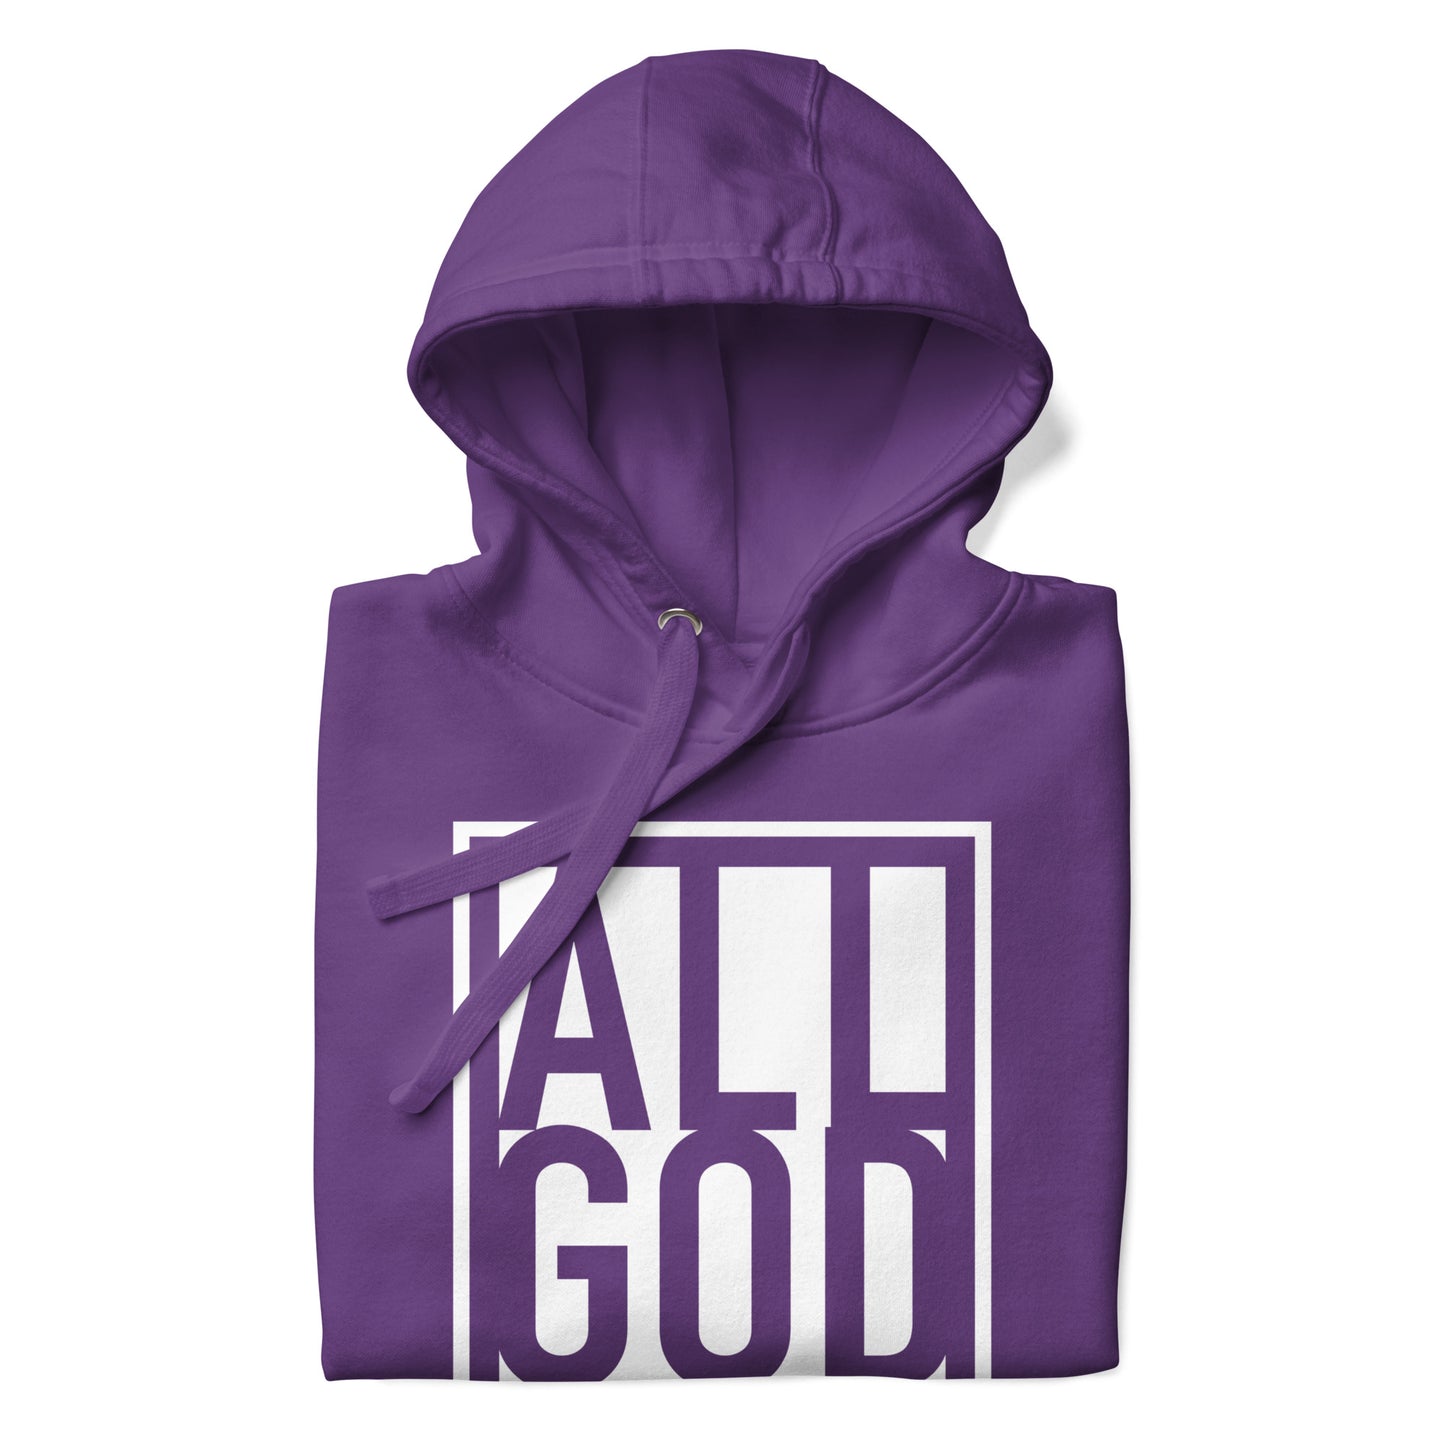 All God Purple and White Unisex Hoodie